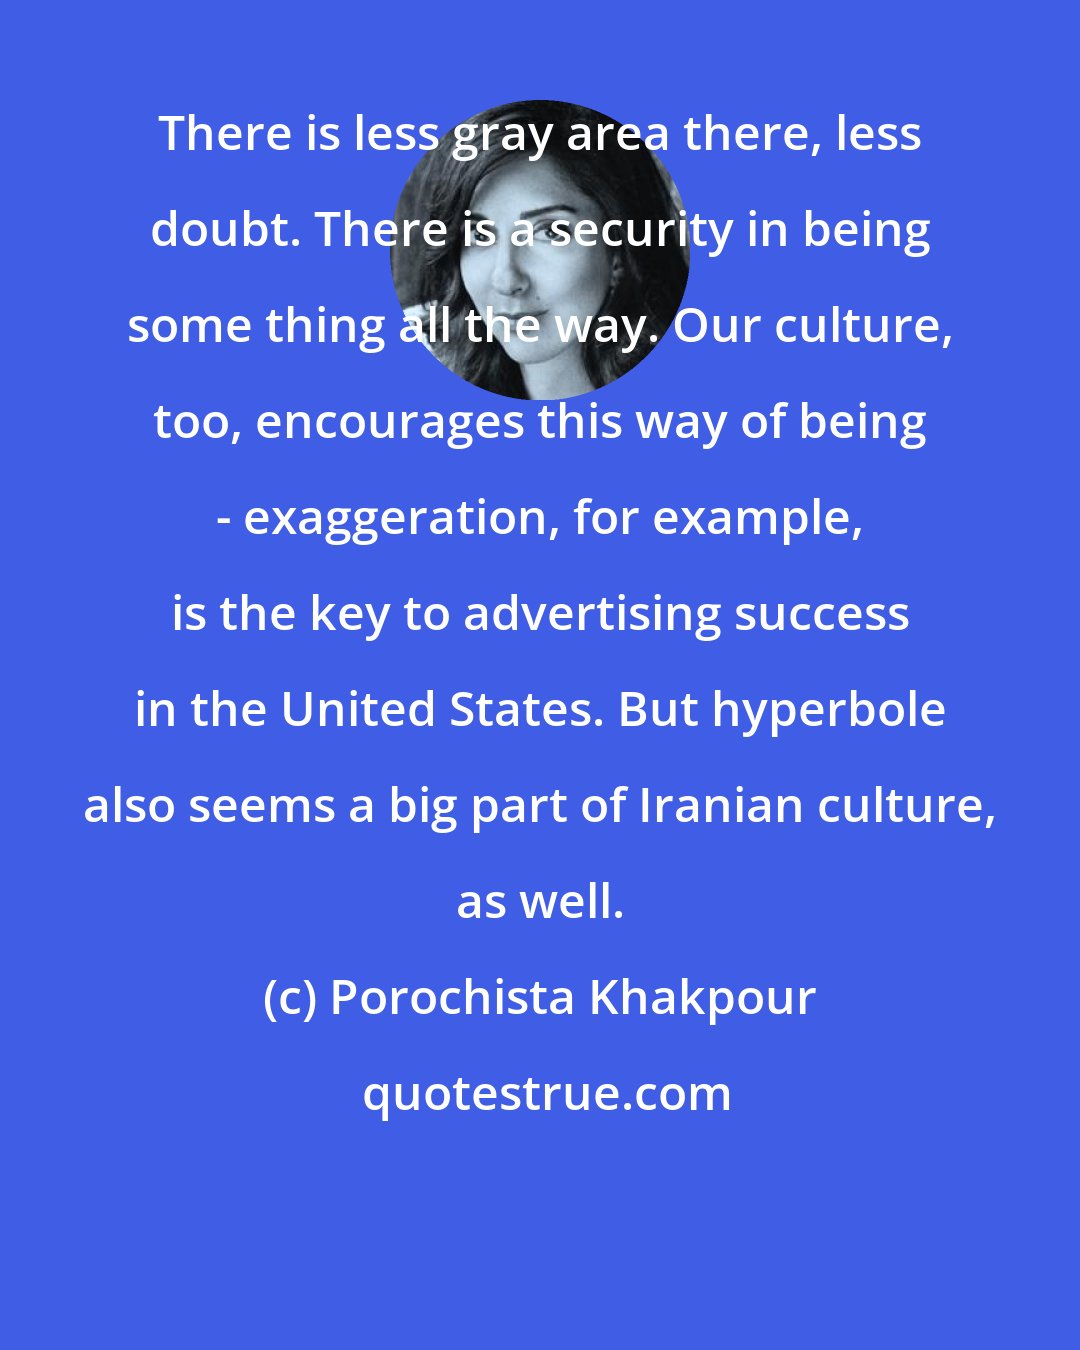 Porochista Khakpour: There is less gray area there, less doubt. There is a security in being some thing all the way. Our culture, too, encourages this way of being - exaggeration, for example, is the key to advertising success in the United States. But hyperbole also seems a big part of Iranian culture, as well.